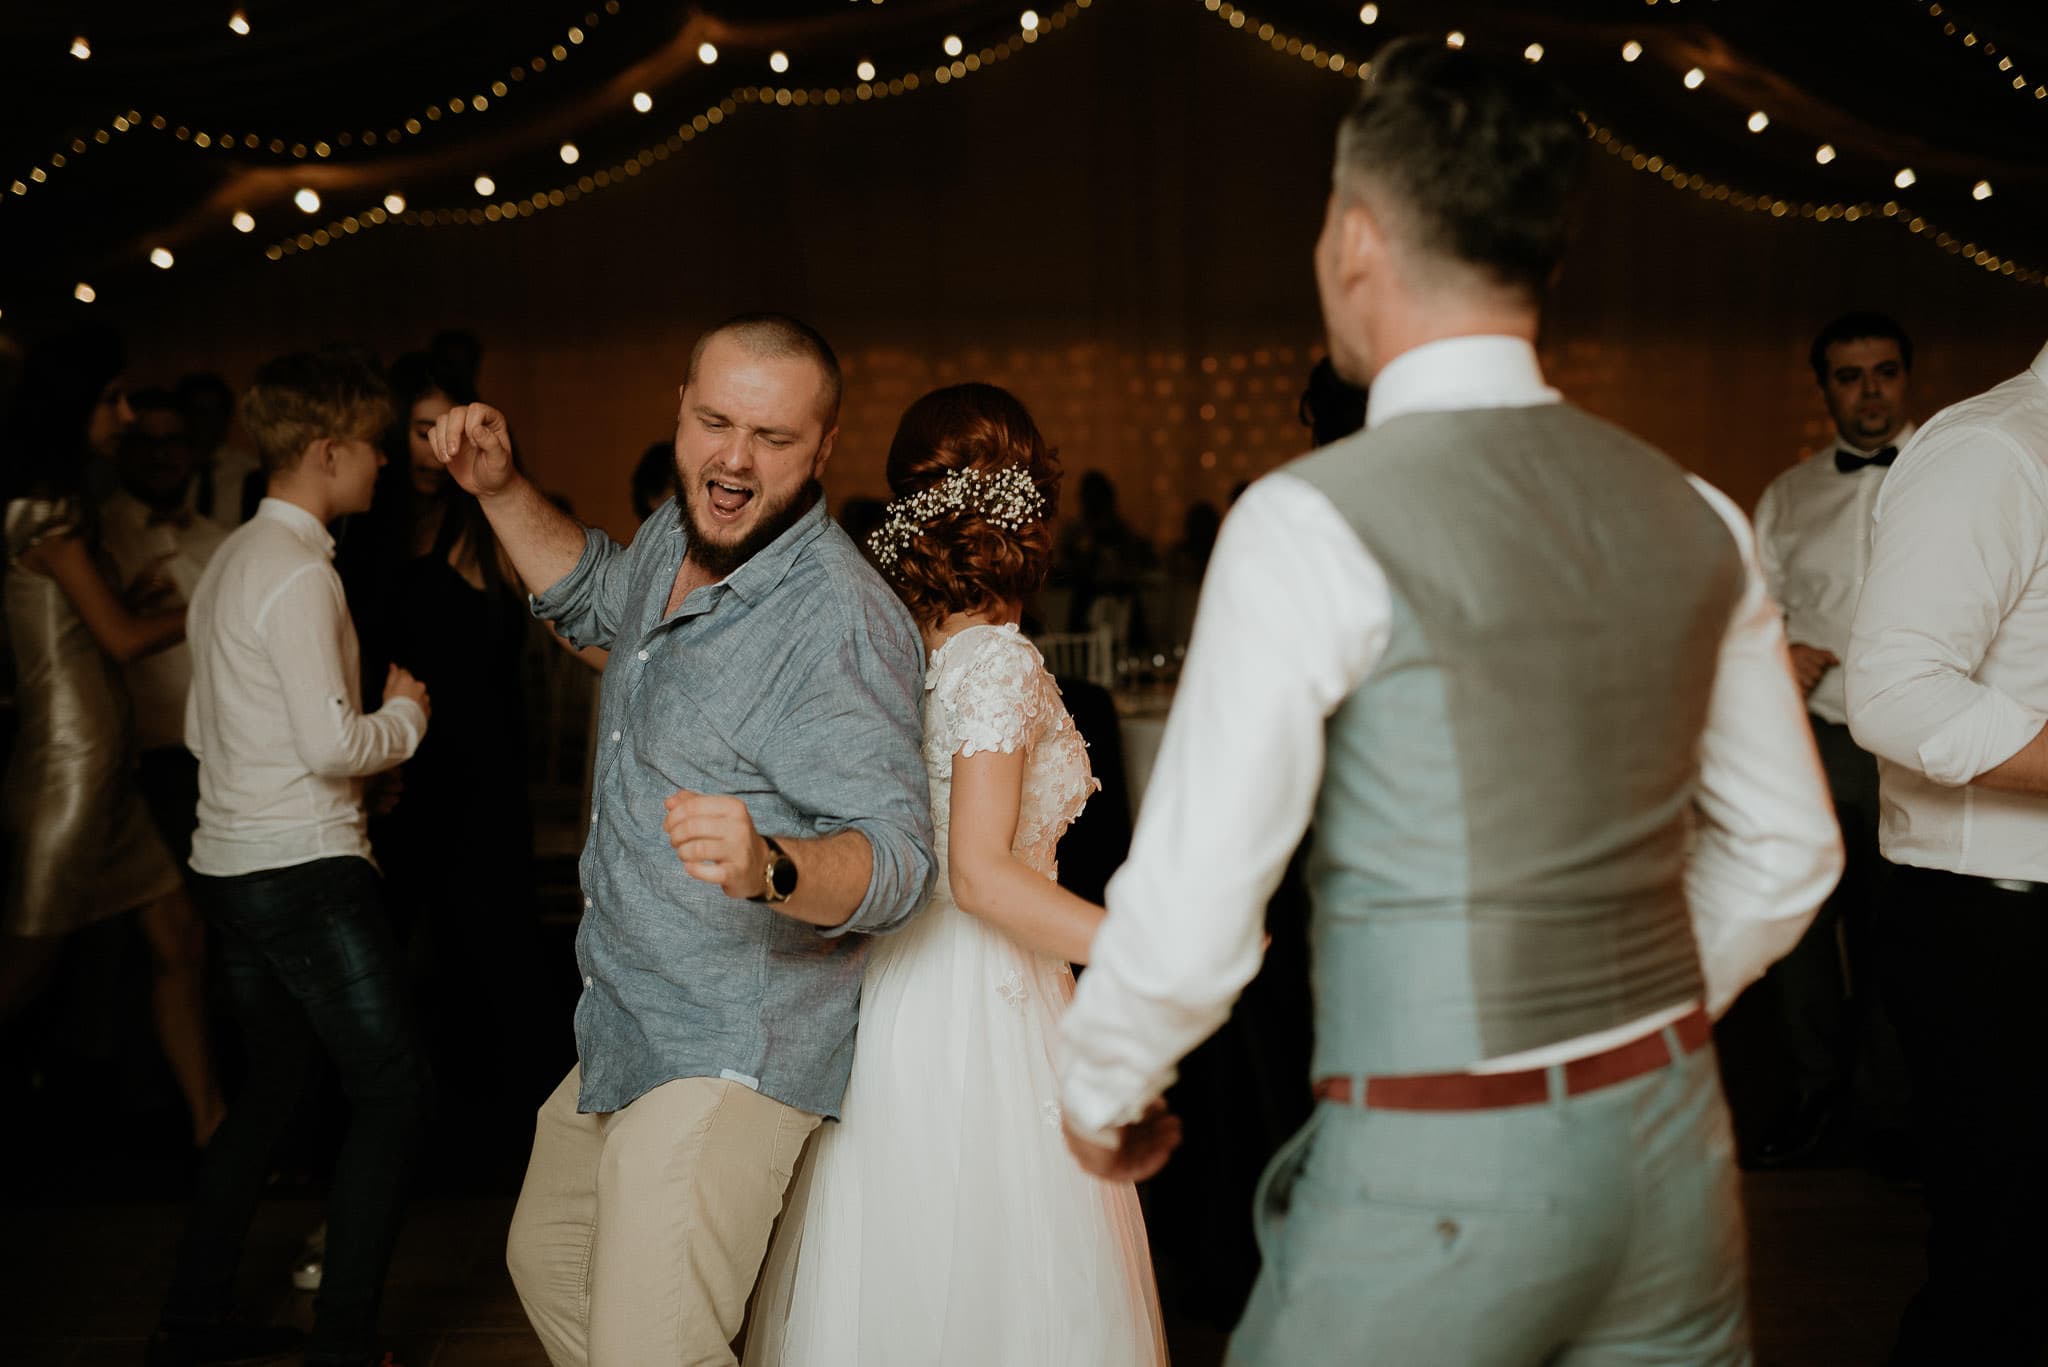 wedding guests dancing at the party